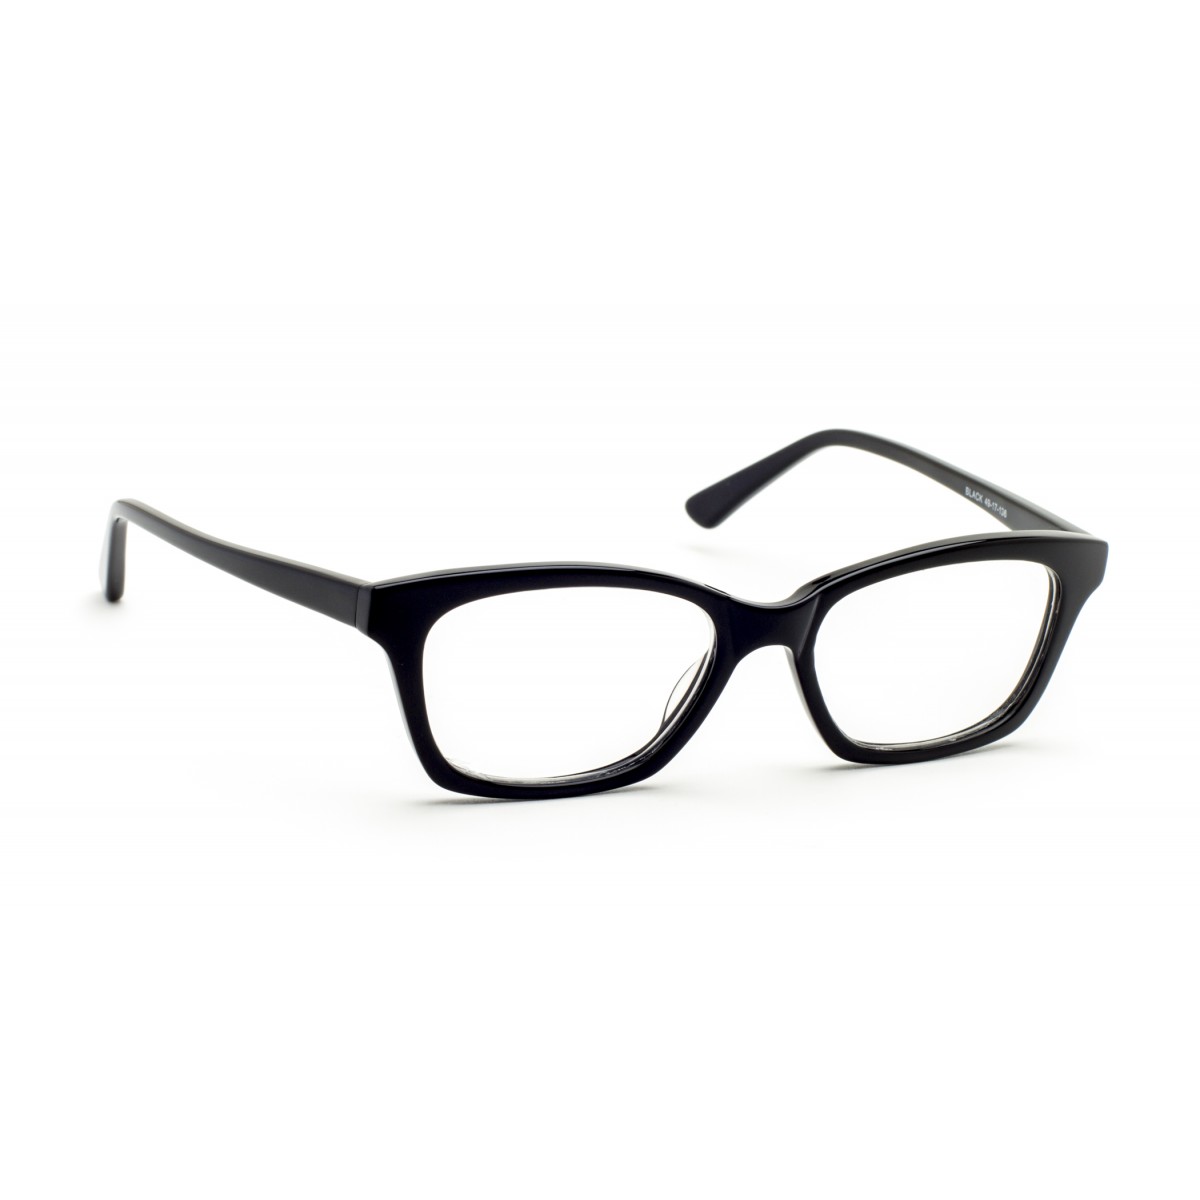 Picture Of Eyeglasses - ClipArt Best